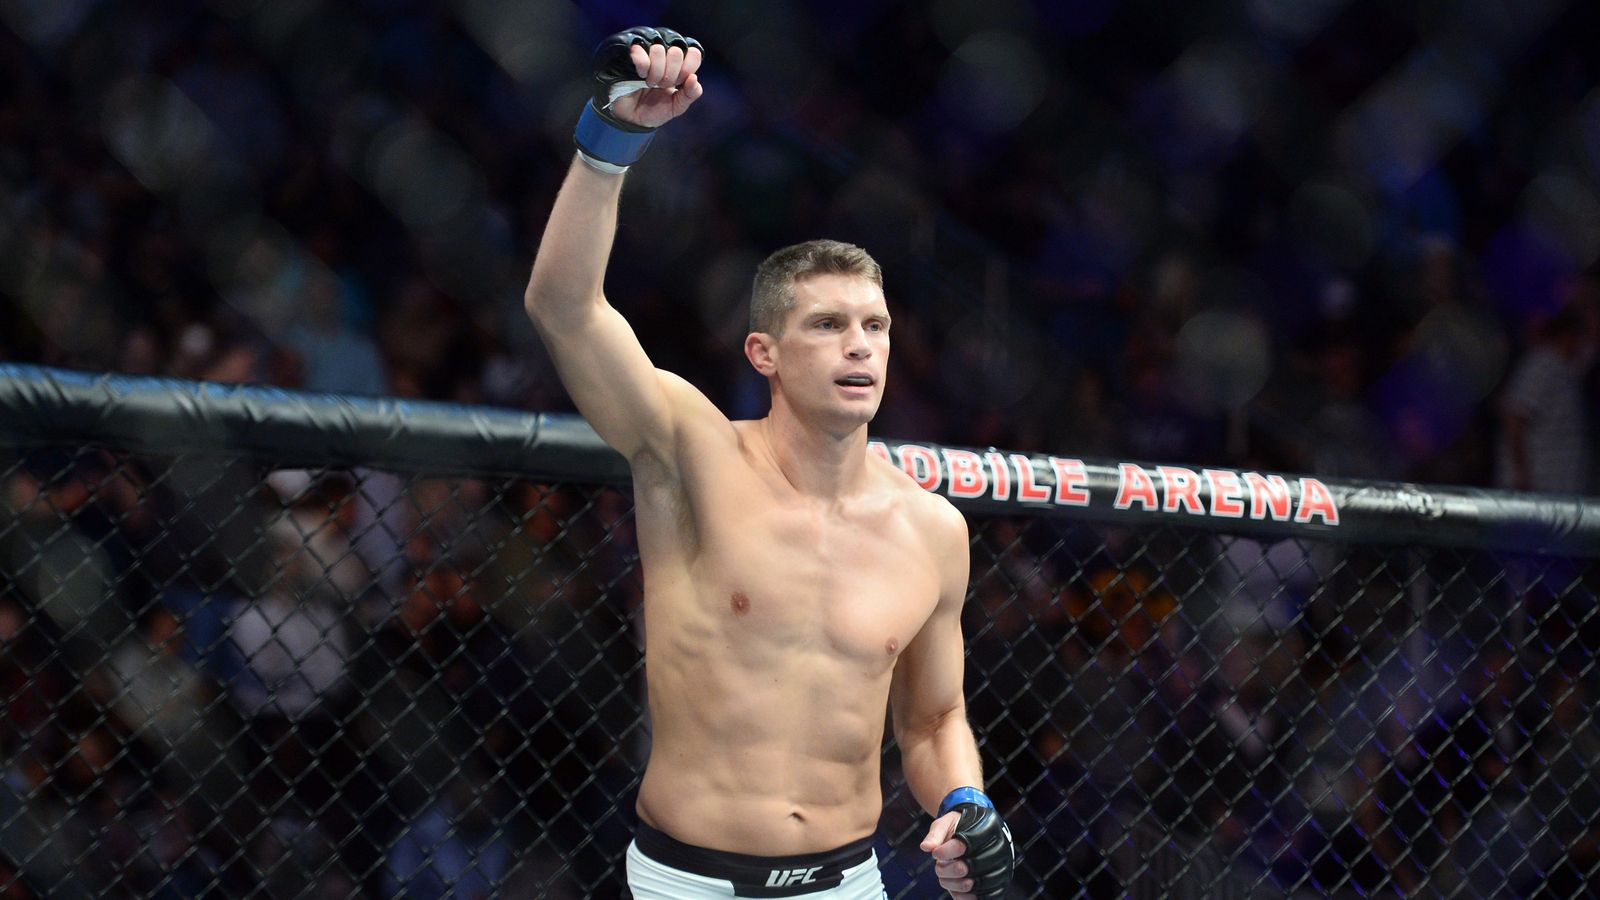 UFC: Stephen Thompson reveals that he did not know who Darren Till was - UFC